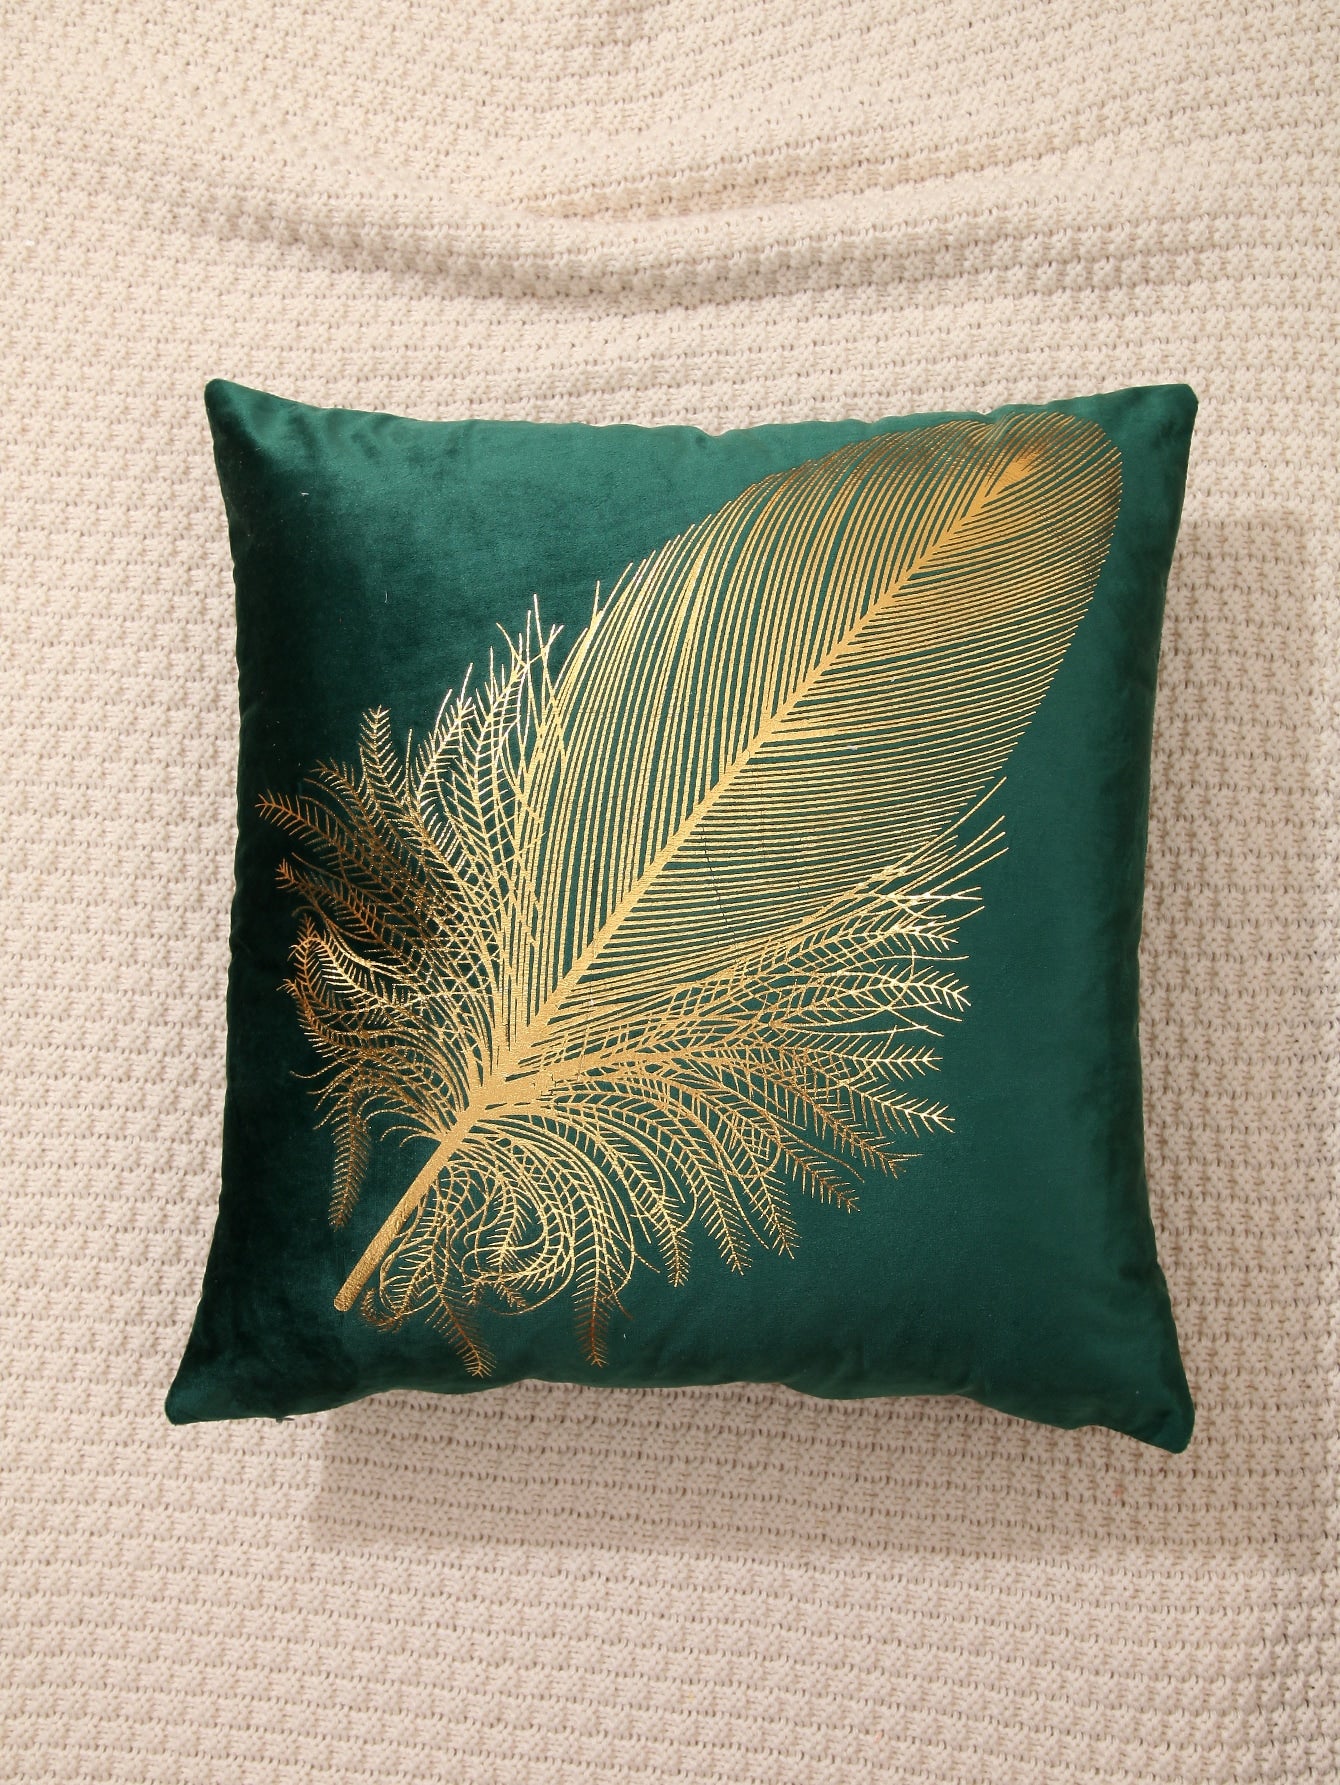 Metallic Gold Feather Cushion Cover Without Filler